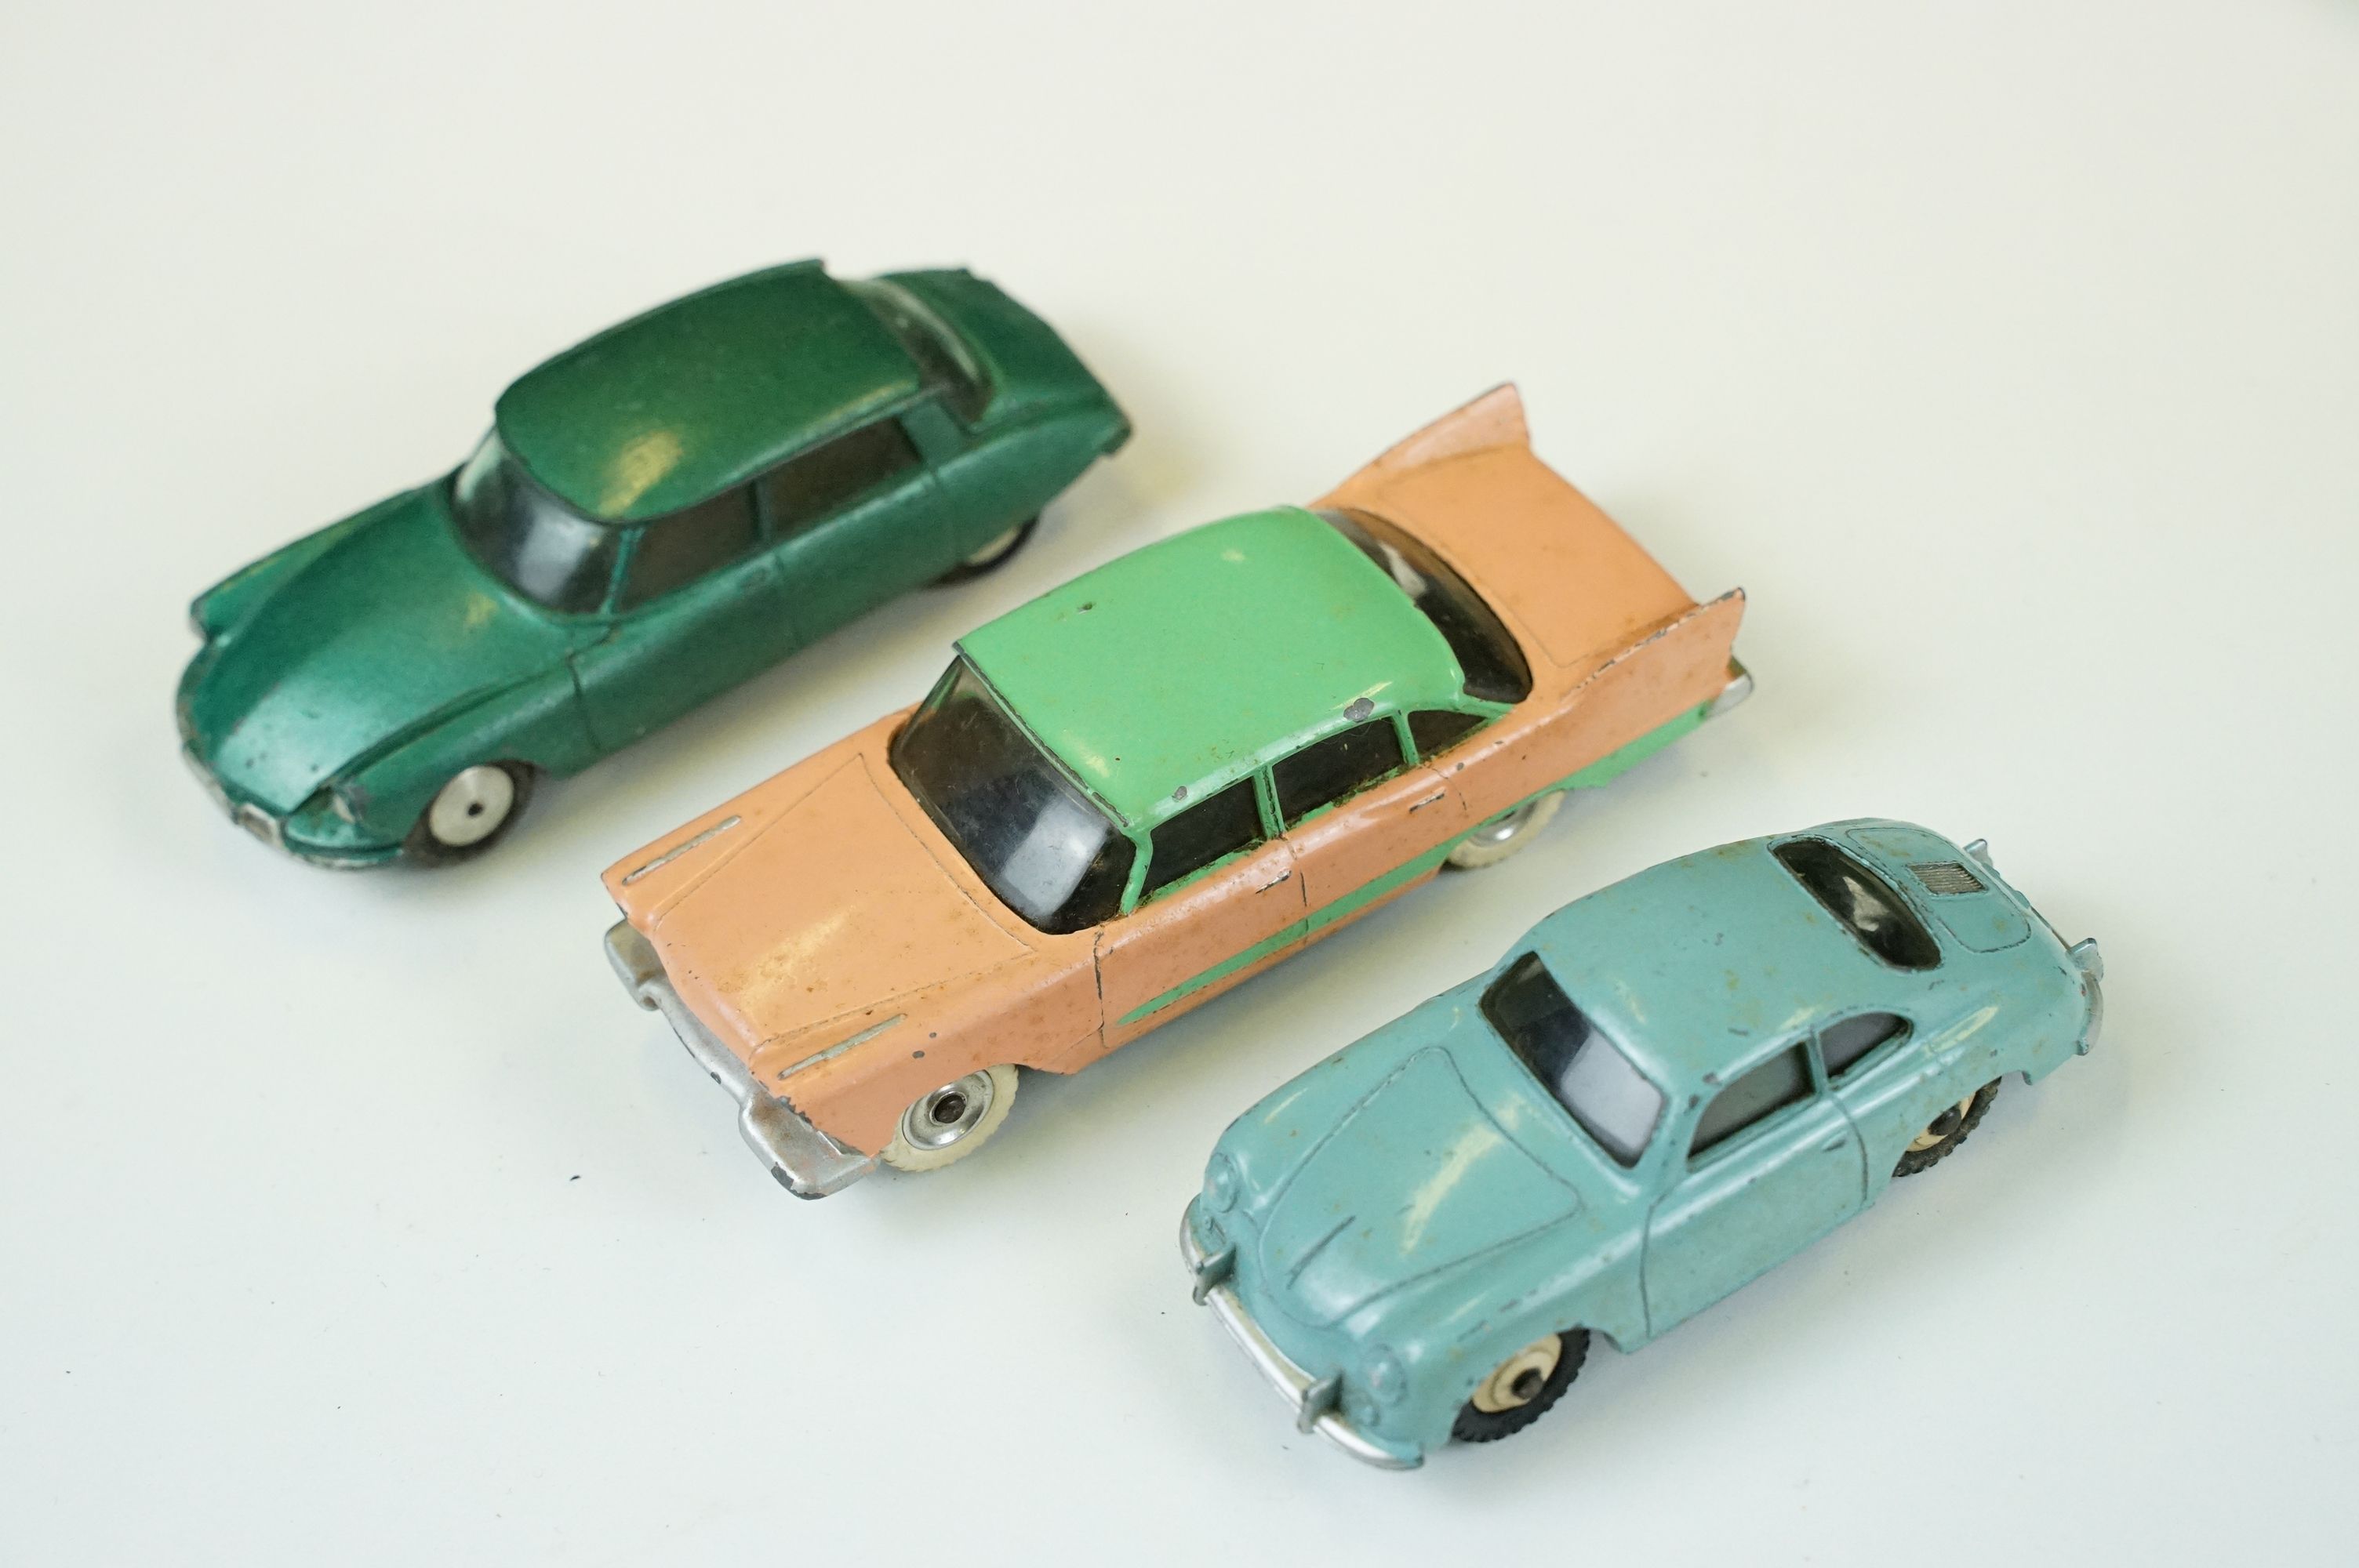 35 Mid 20th C play worn diecast models to include Dinky, Triang & Corgi examples, featuring Triang - Image 6 of 13